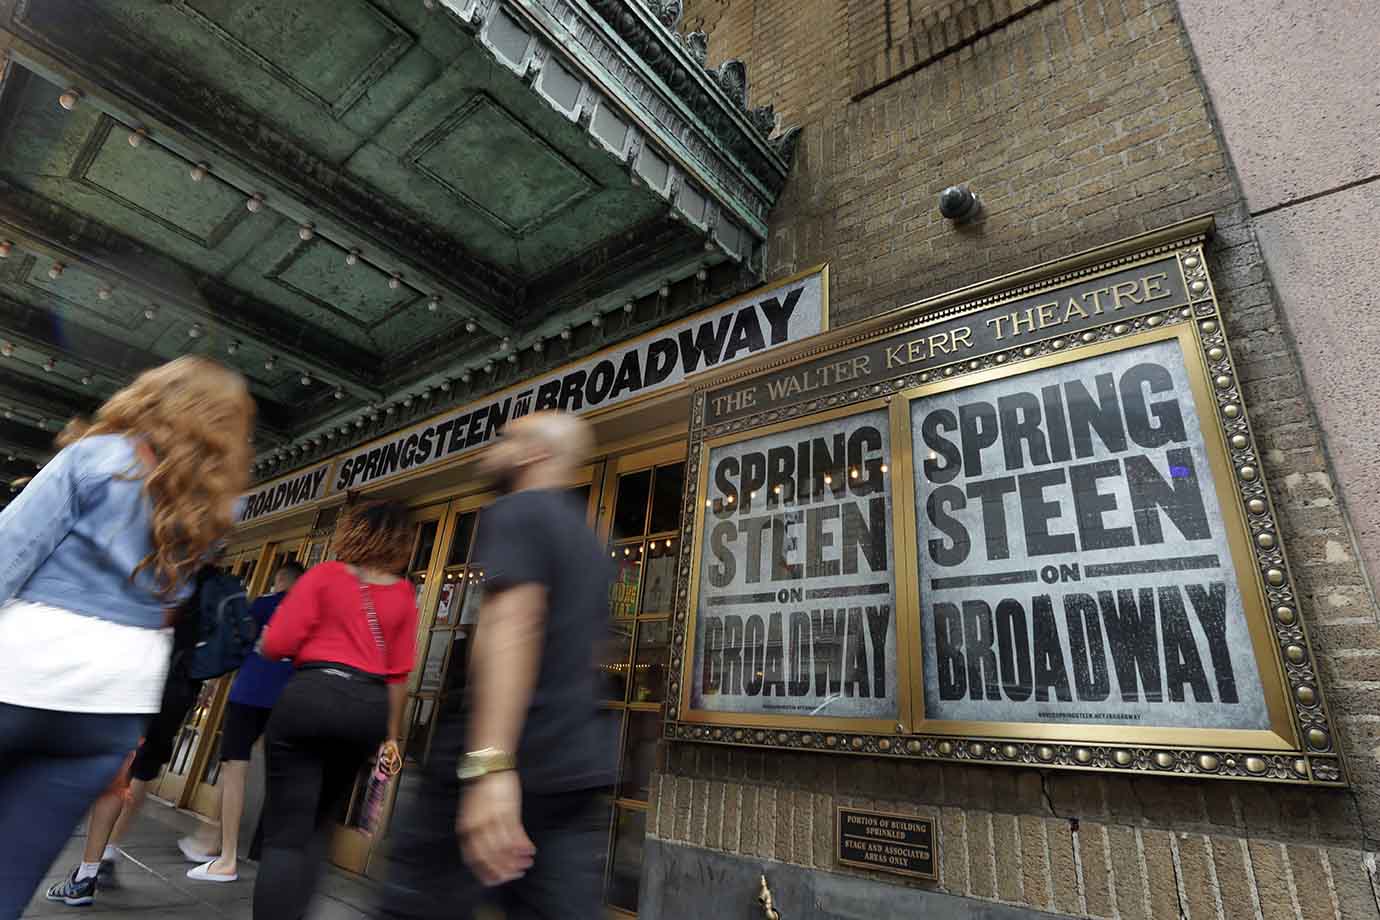 Springsteen On Broadway Walter Kerr Theatre Seating Chart